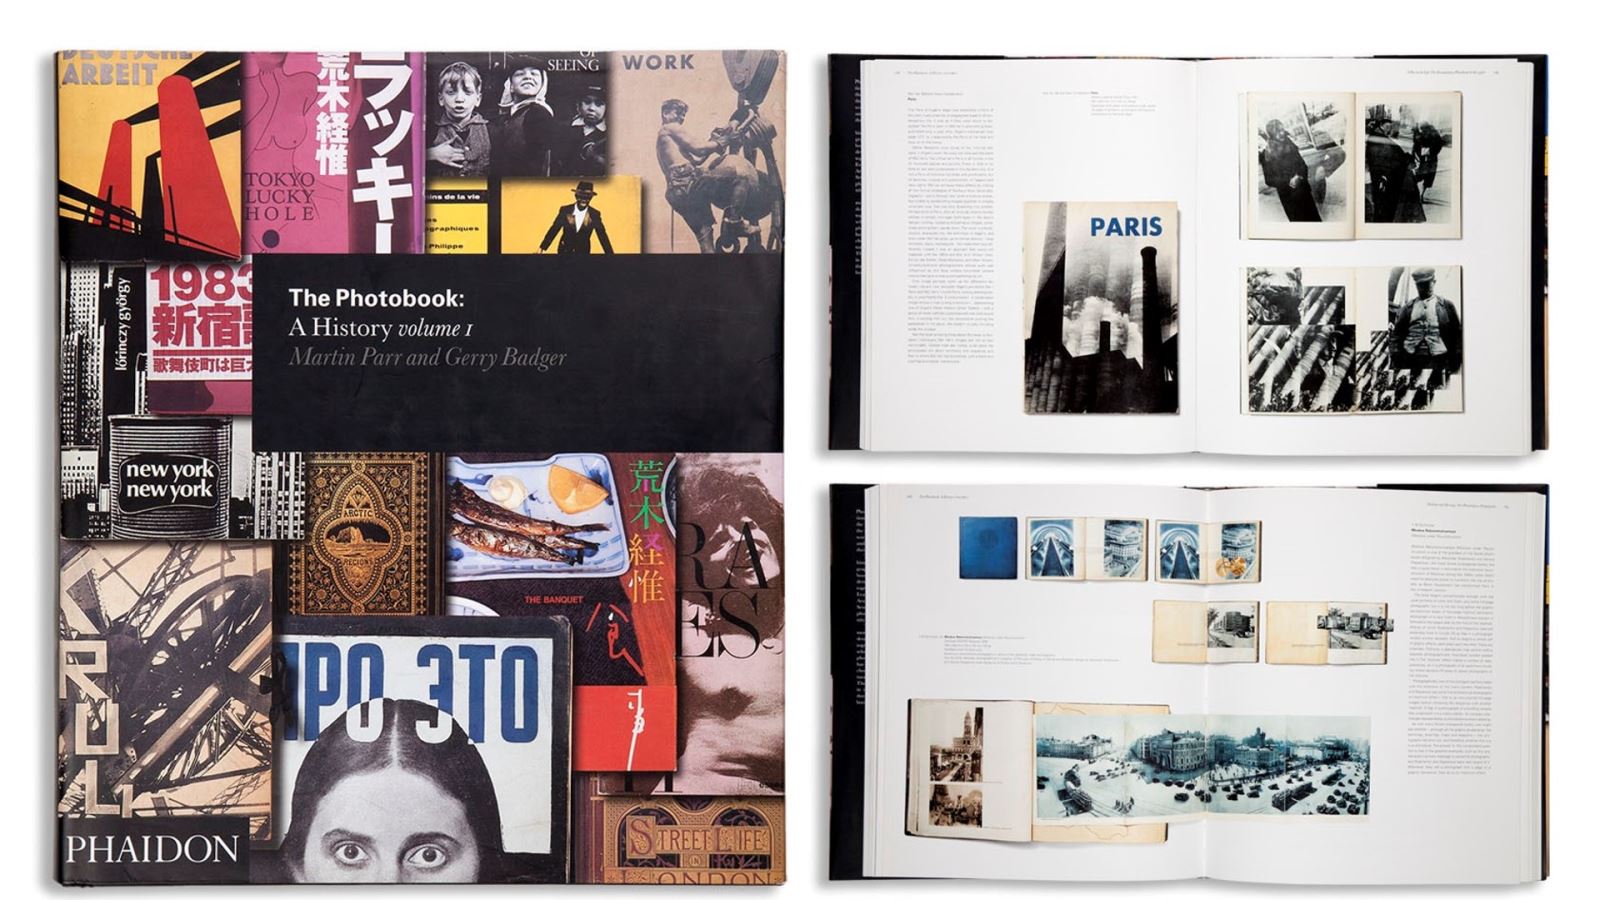 The Photobook: A History Volume 1, published by Phaidon, 2004